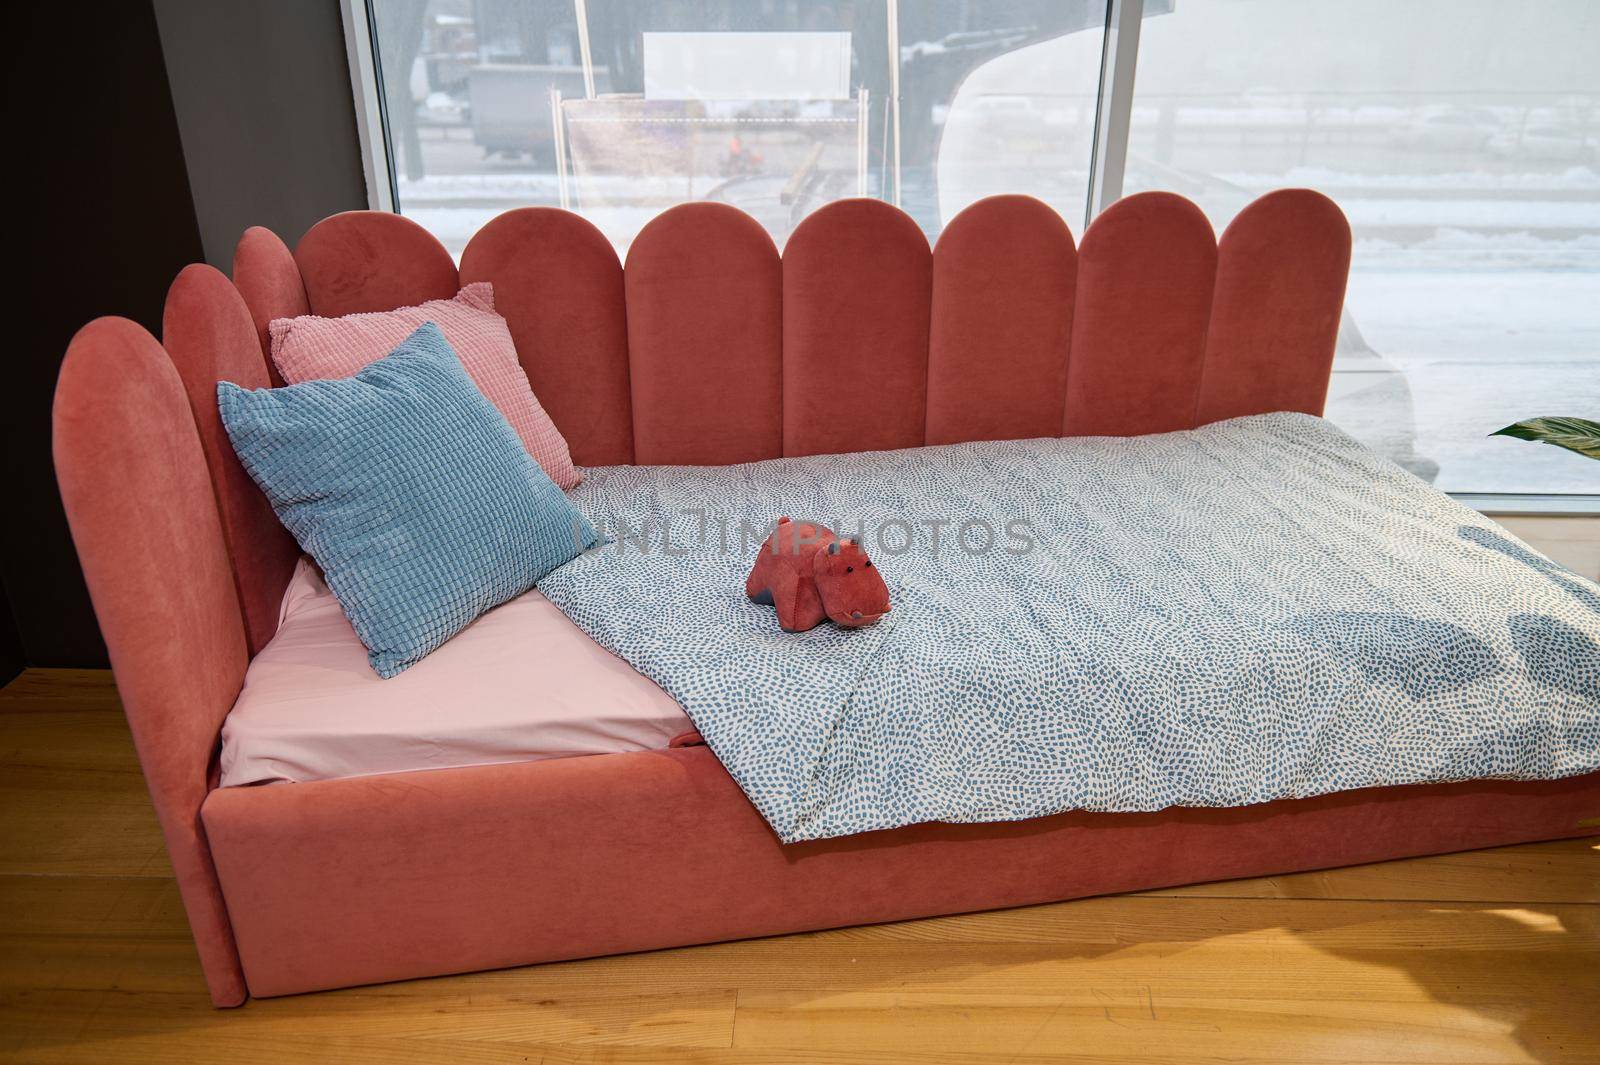 Modern stylish and minimalist children's sofa bed with soft bright coral velour fabric, on display for sale in the showroom of the highest quality furniture store